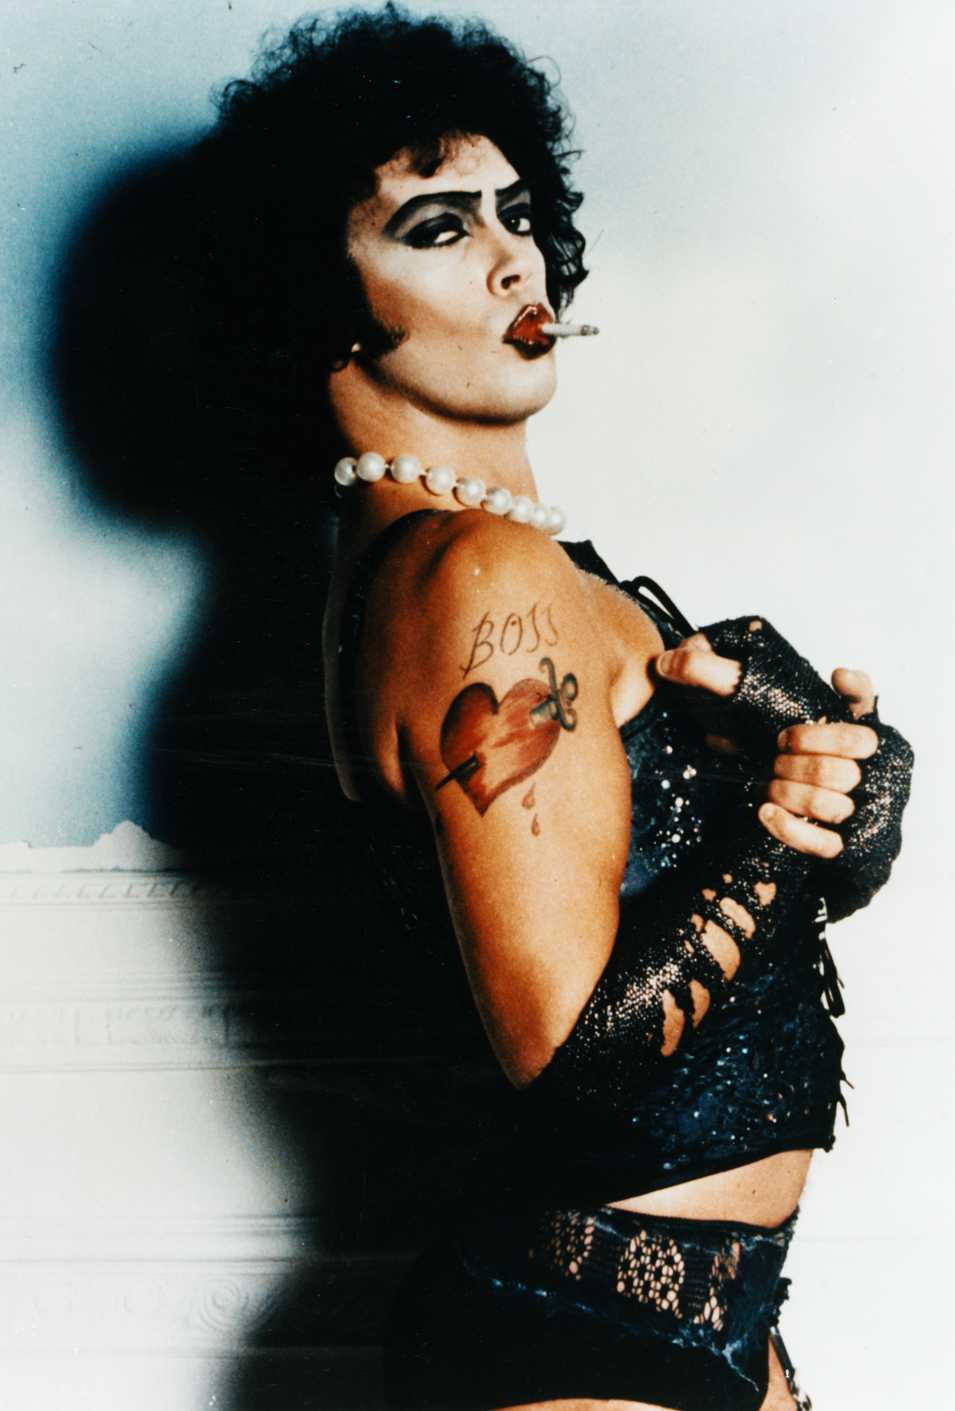 tim-curry-frank-n-furter-in-drag-rocky-horror-picture-show.png